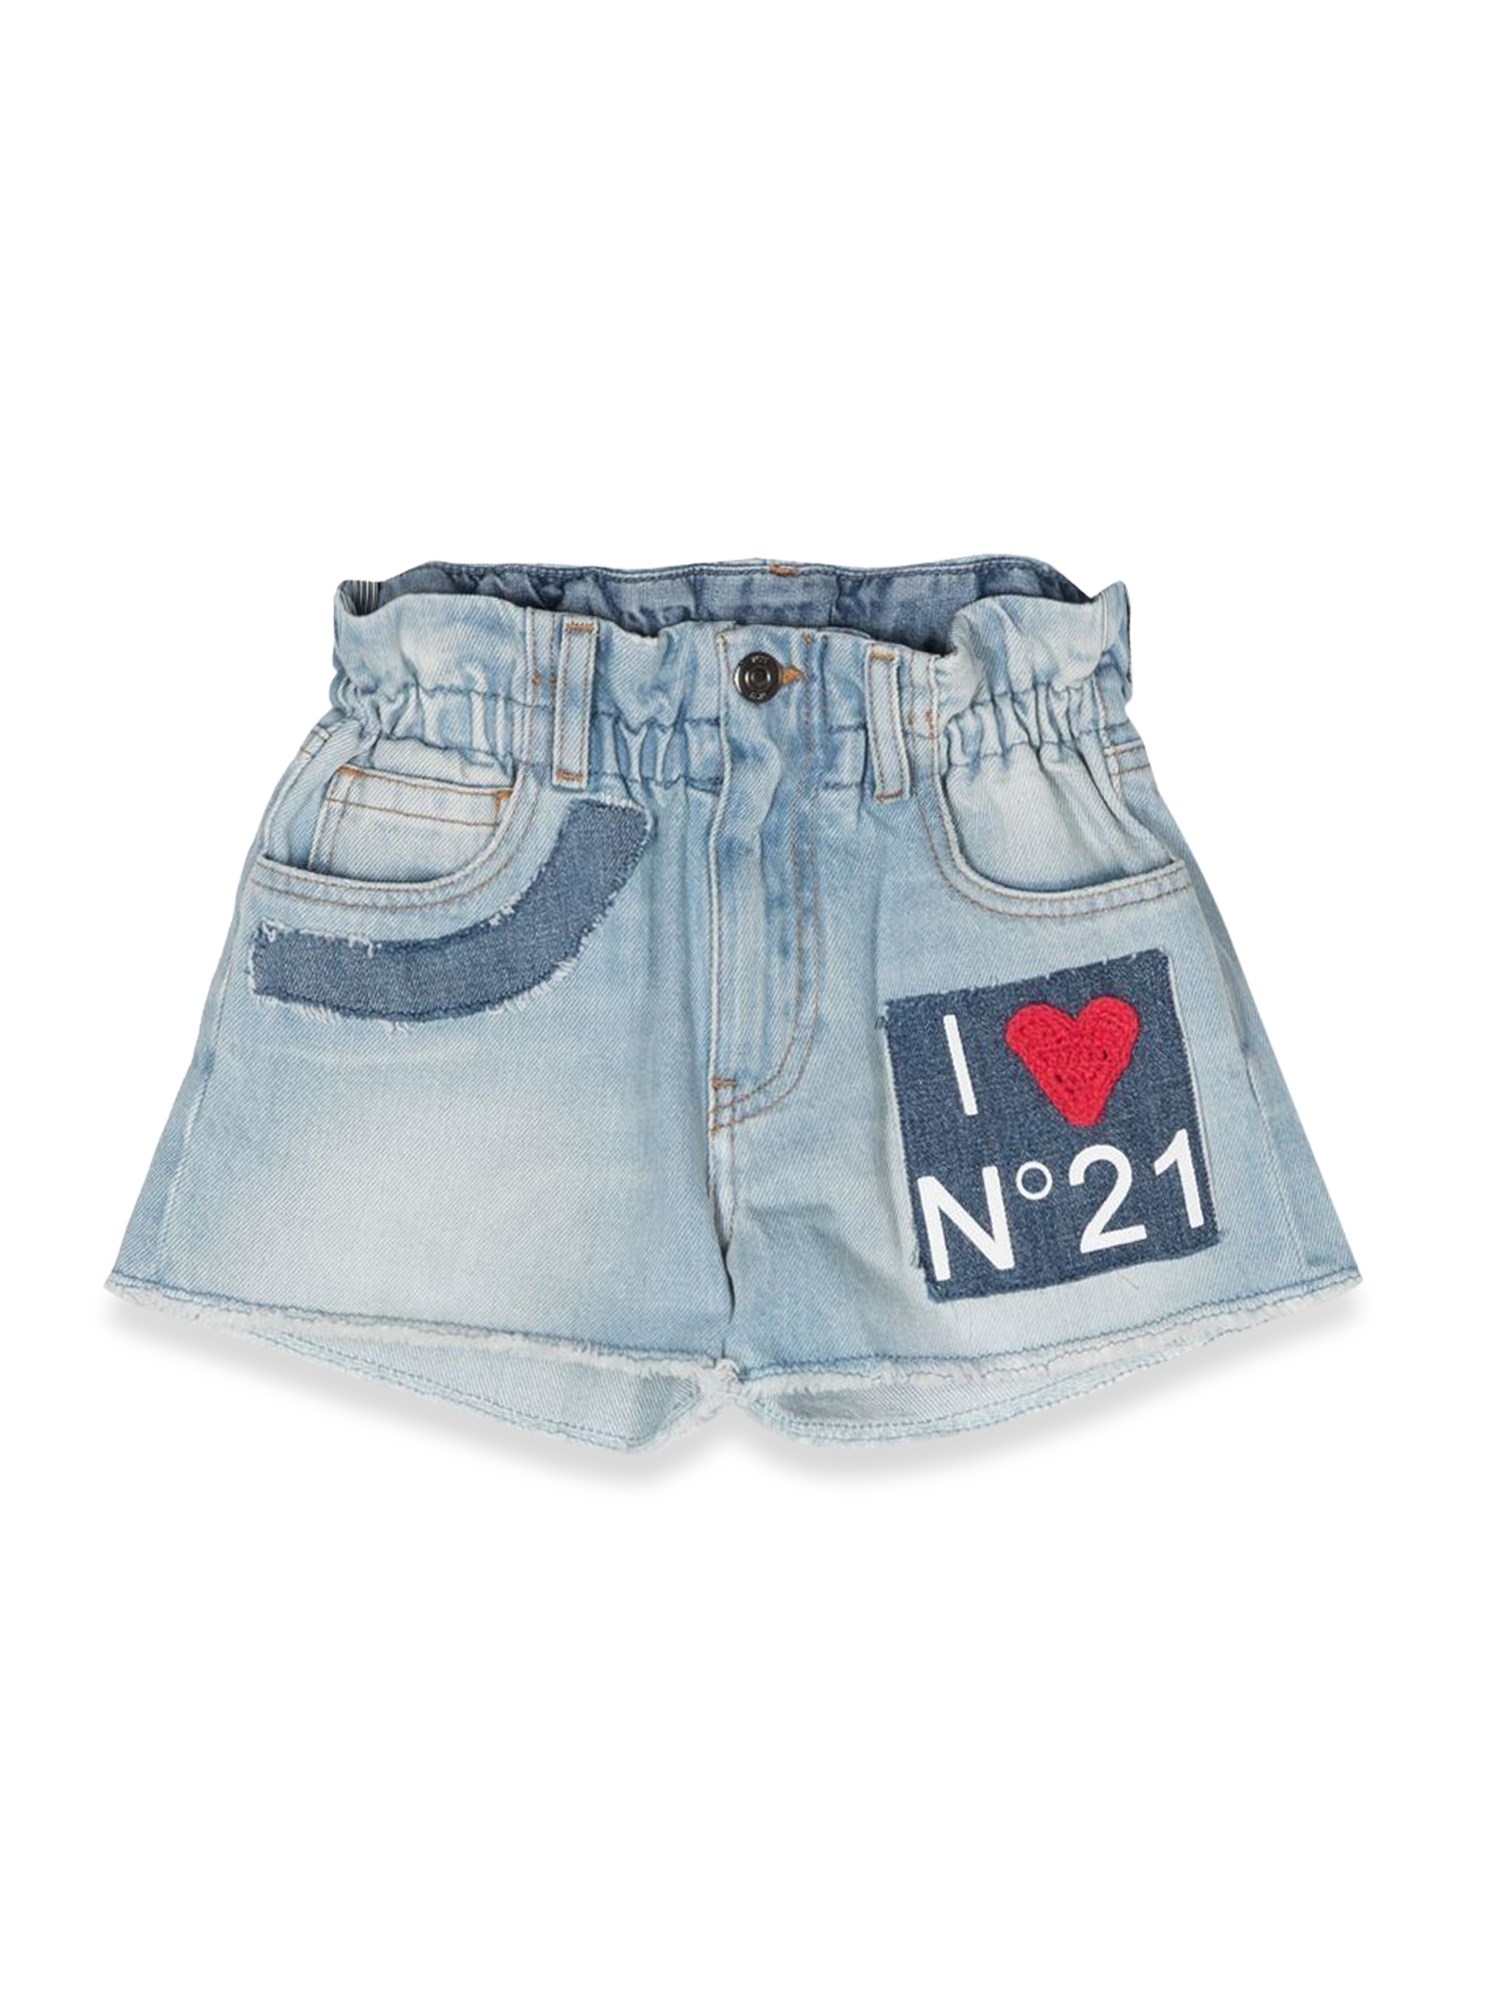 N°21 DENIM SHORTS WITH PATCH